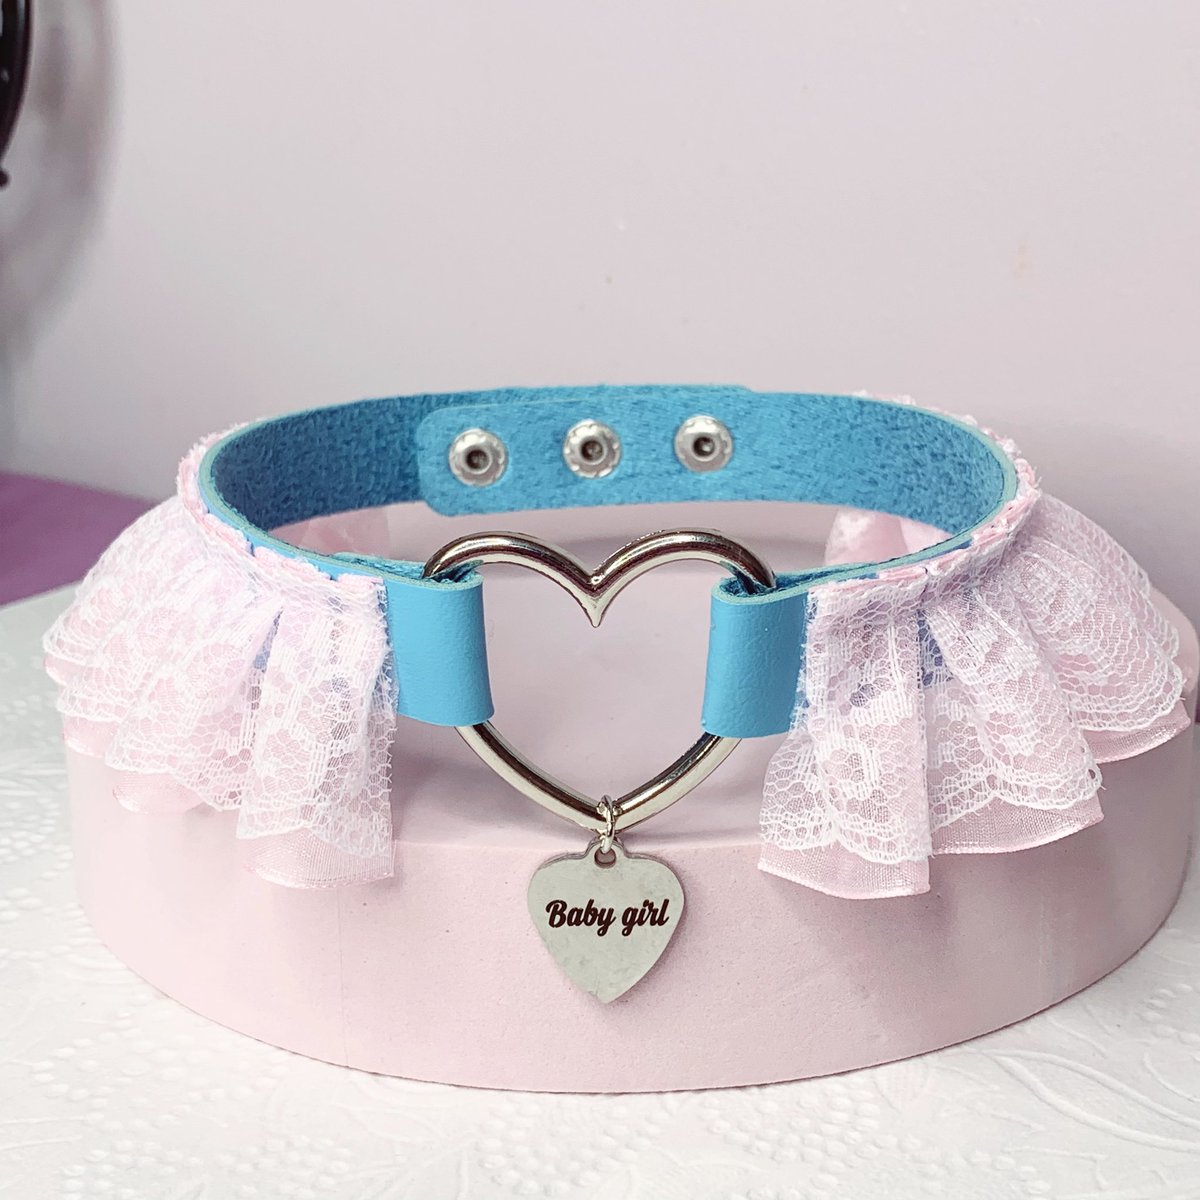 the baby girl lace collar ☁️🎀 planning on creating an assortment of colour ways with these style charms for the kitten & bratty babes 🤍 shopdefiantdolls.bigcartel.com